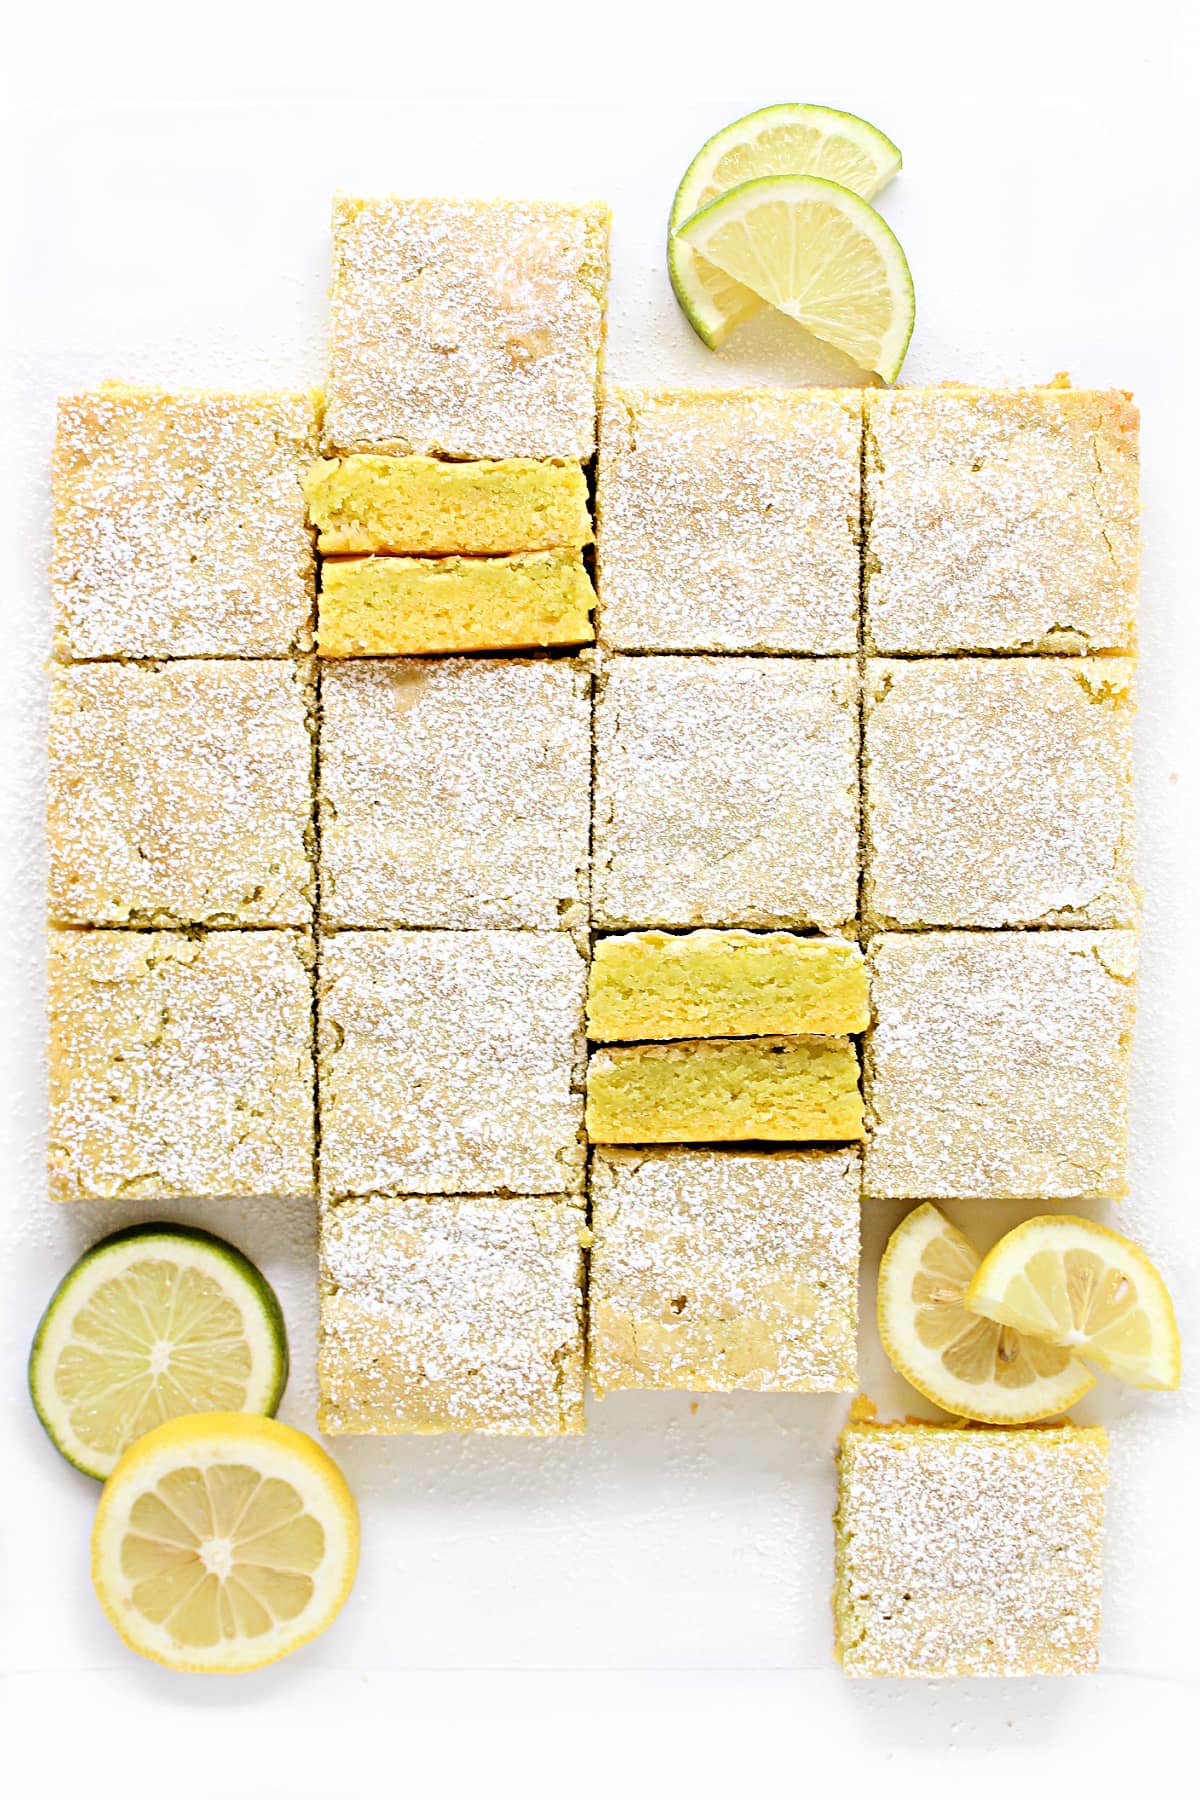 Lemon Lime Bars cut in squares and topped with powdered sugar.